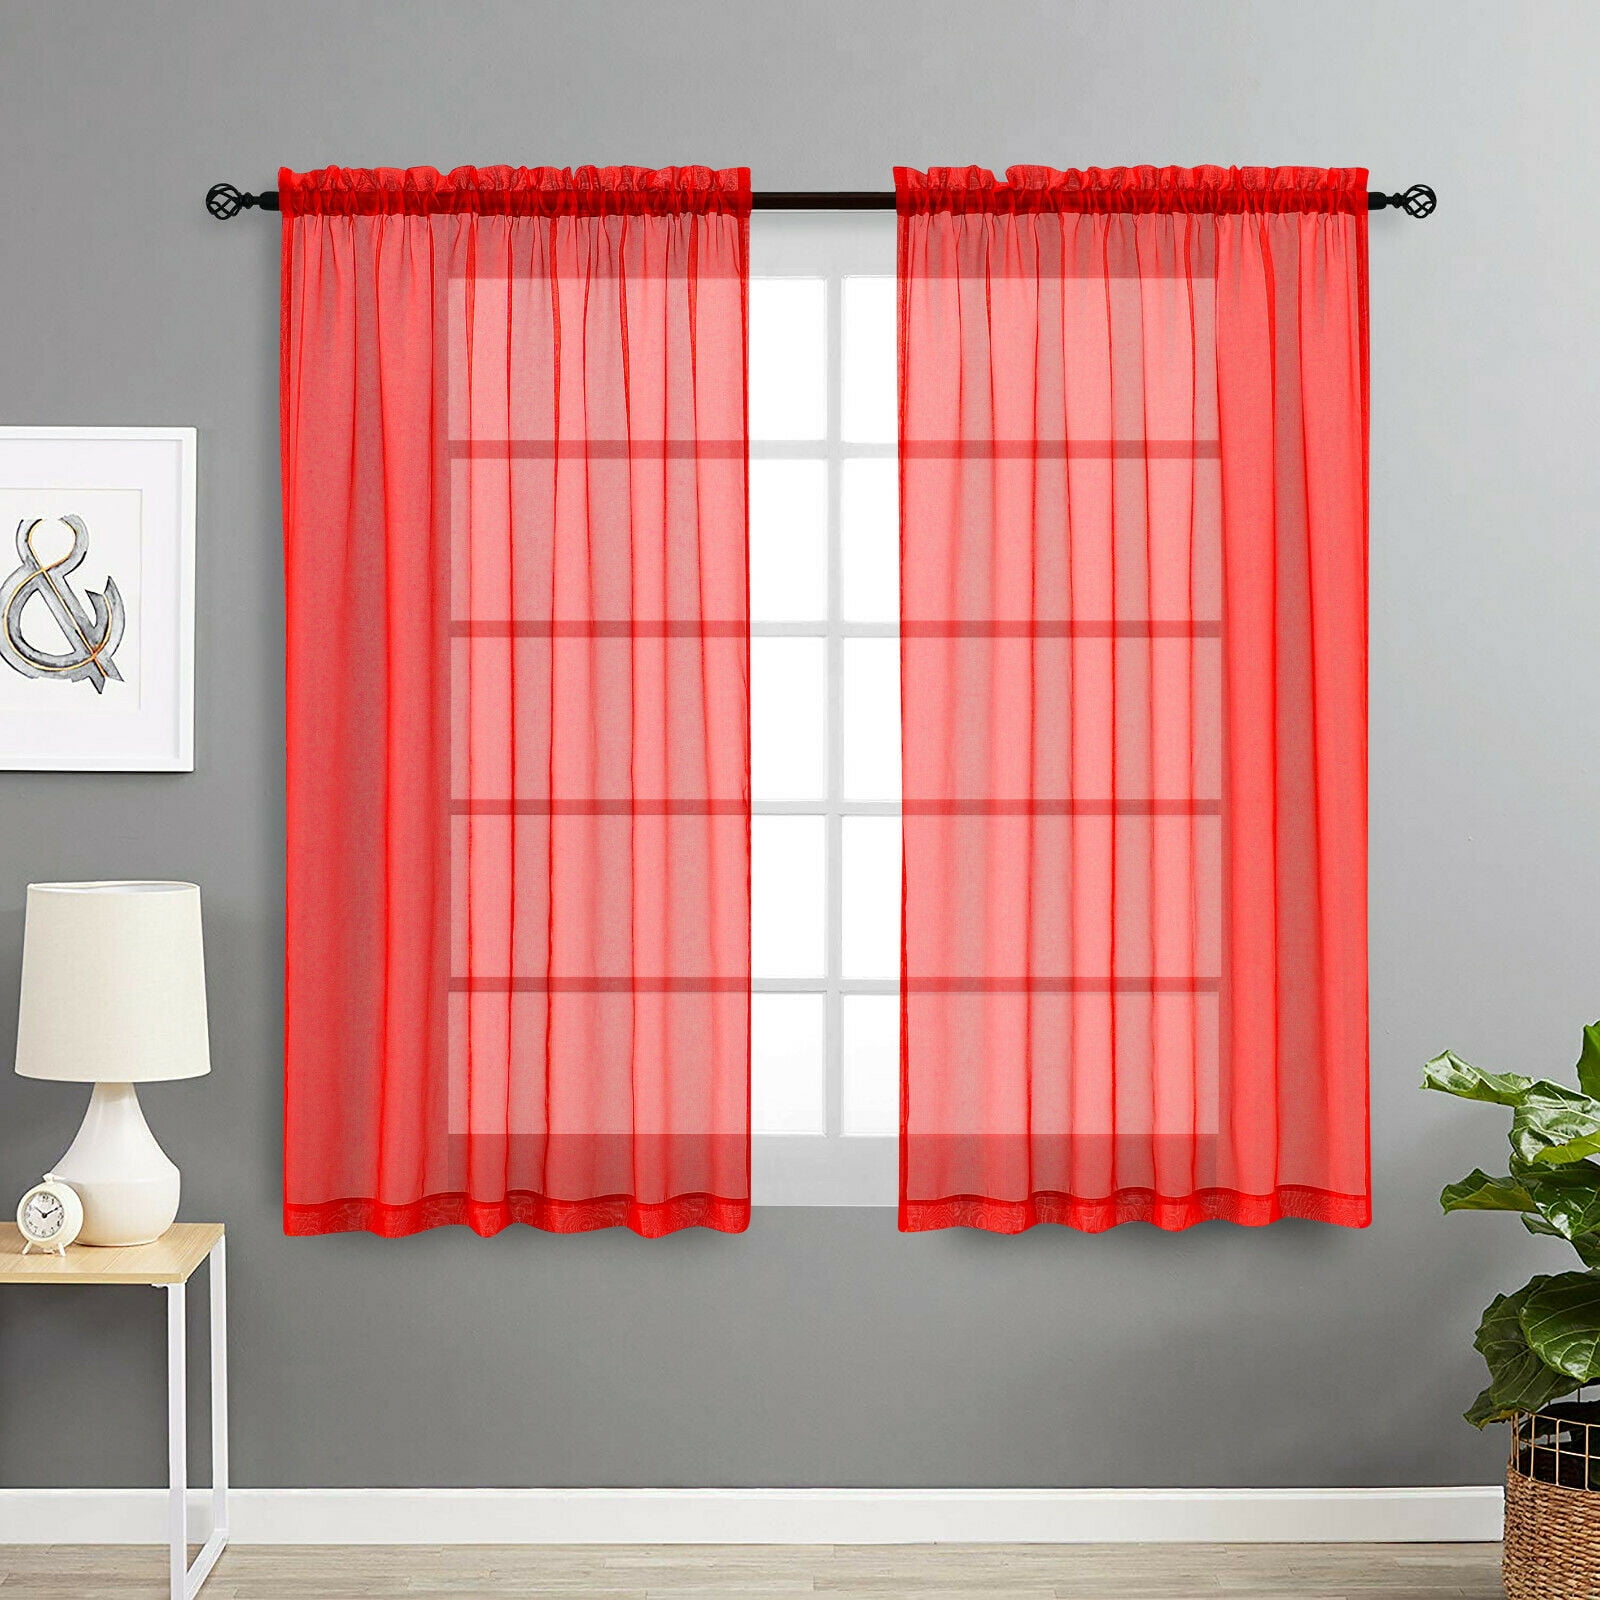 Details about   Unbranded Rod Pocket Curtain Panel Red 54X63 